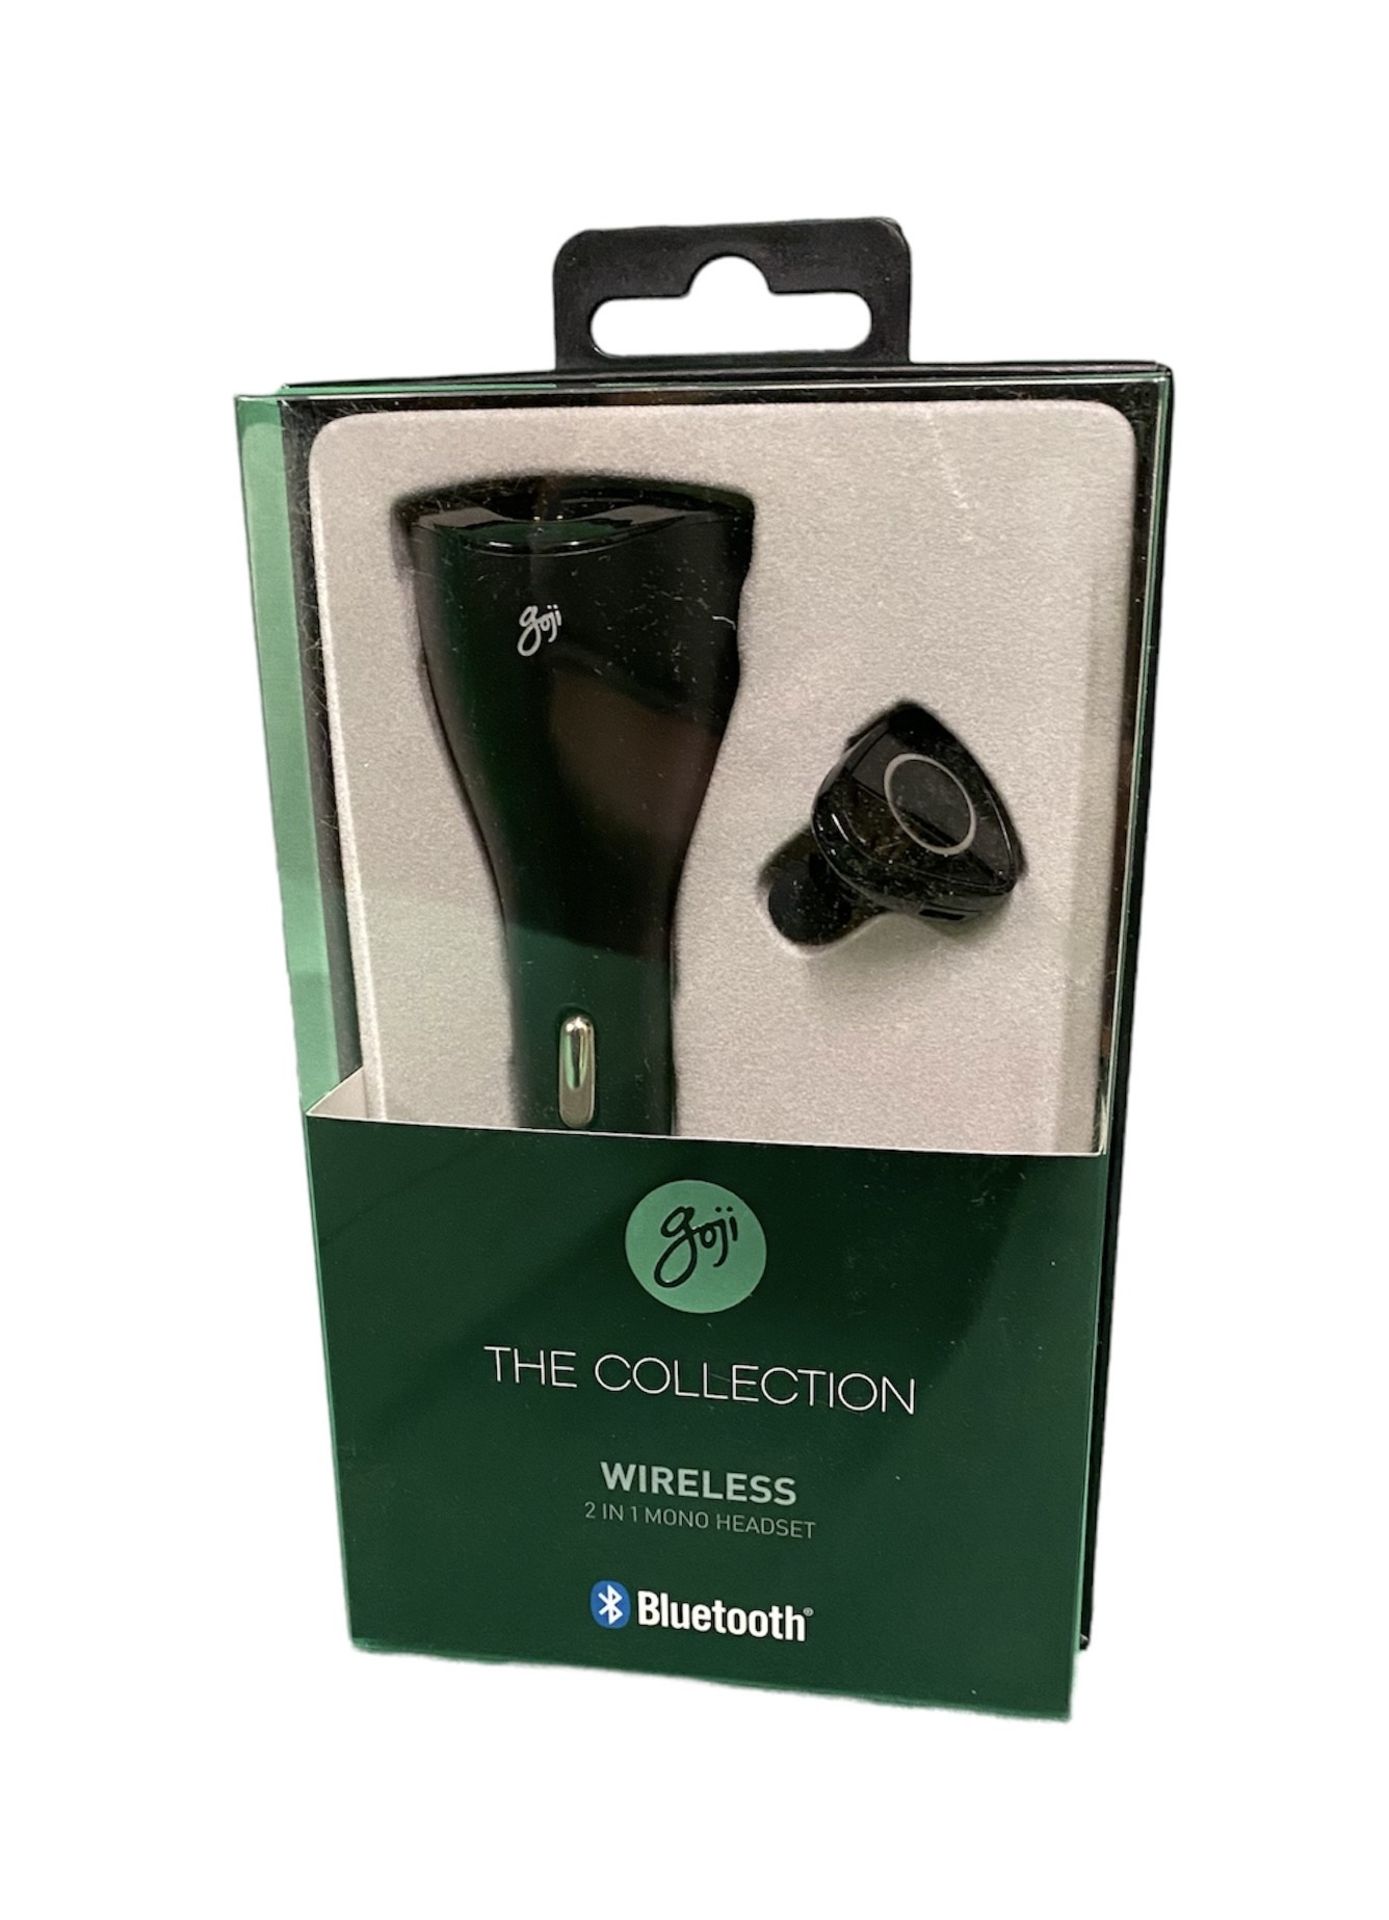 4 x Goji The Collection Bluetooth 2 In 1 Hands Free With in Car Charging Cradle